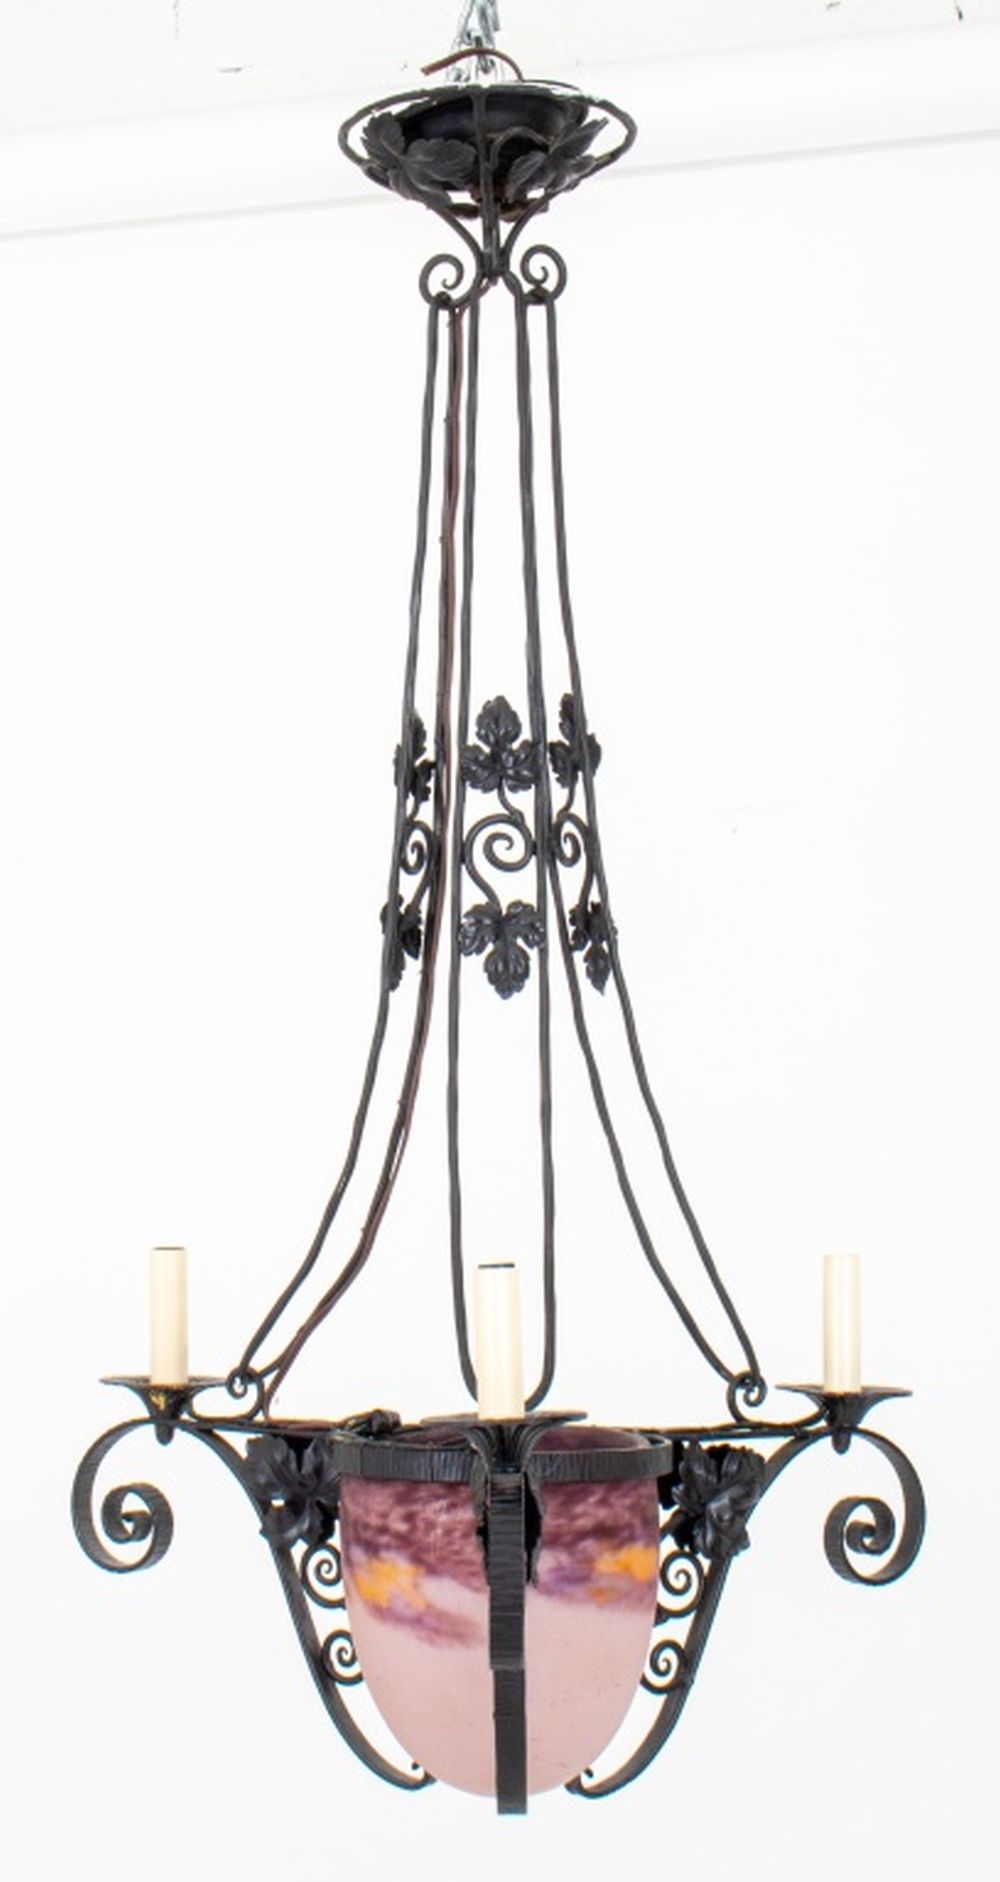 ART DECO STYLE WROUGHT IRON HALL 2fc94a